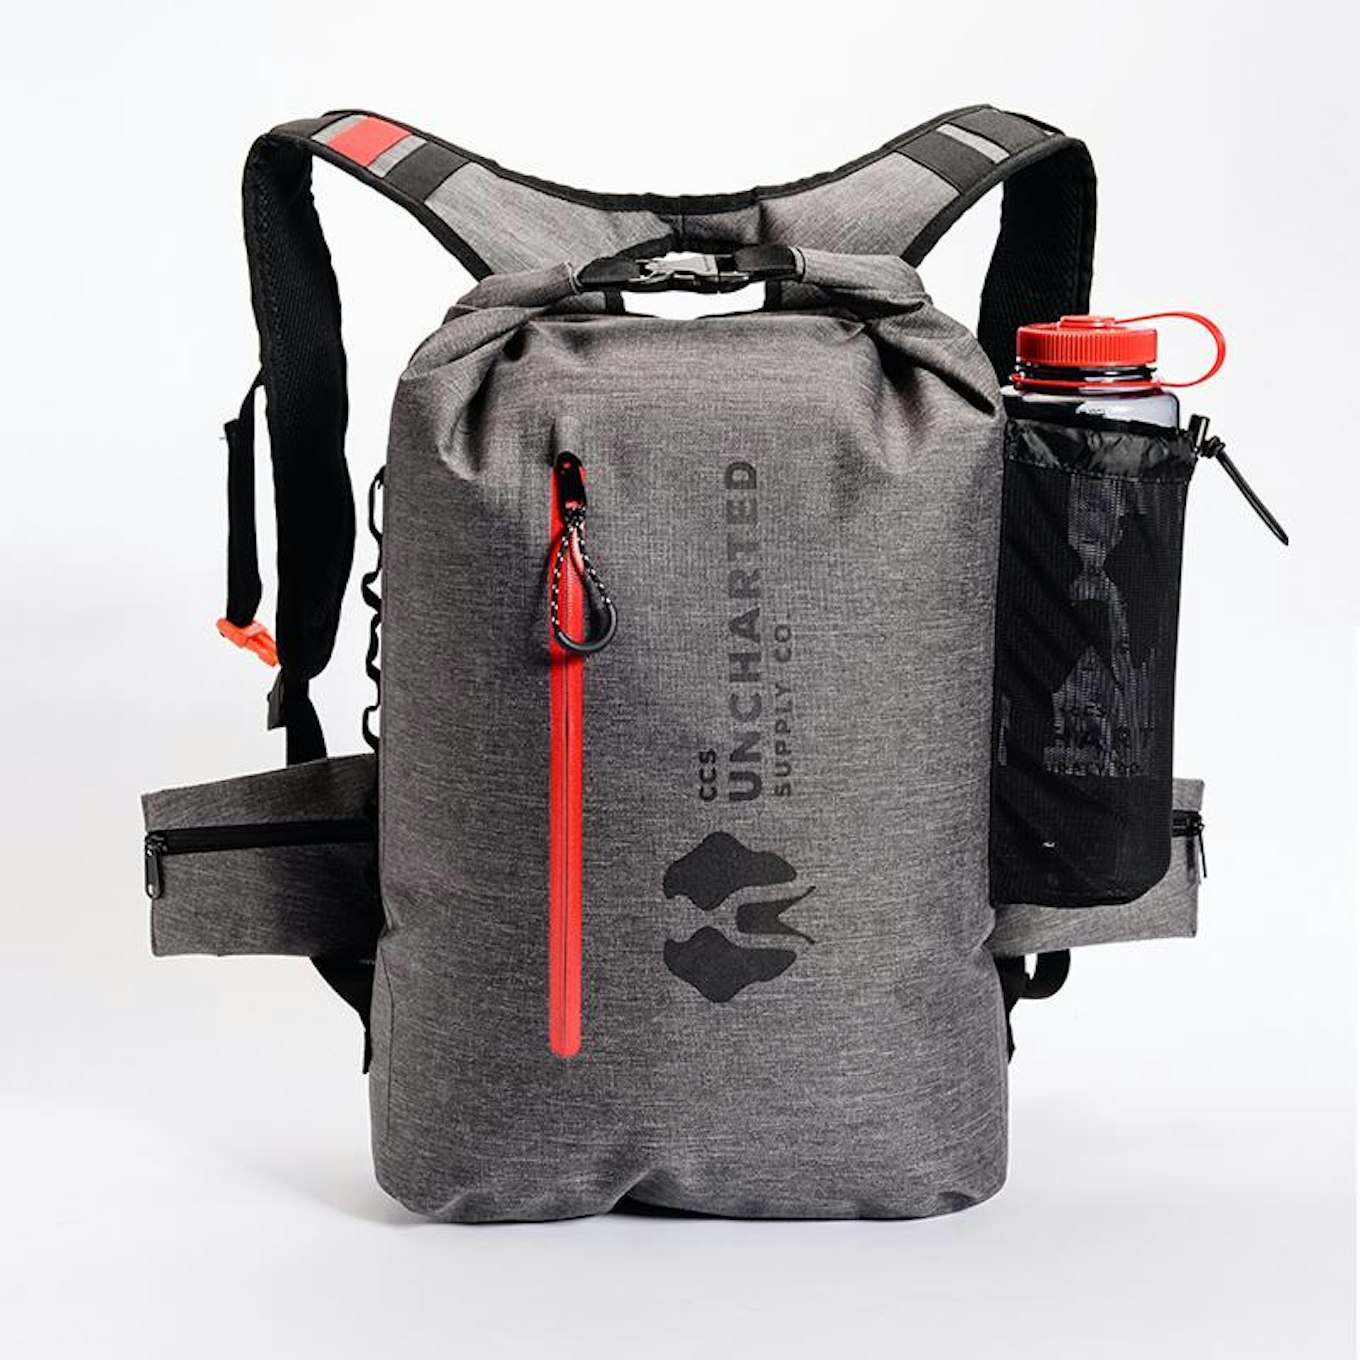 Is This the Ultimate Survival Backpack?